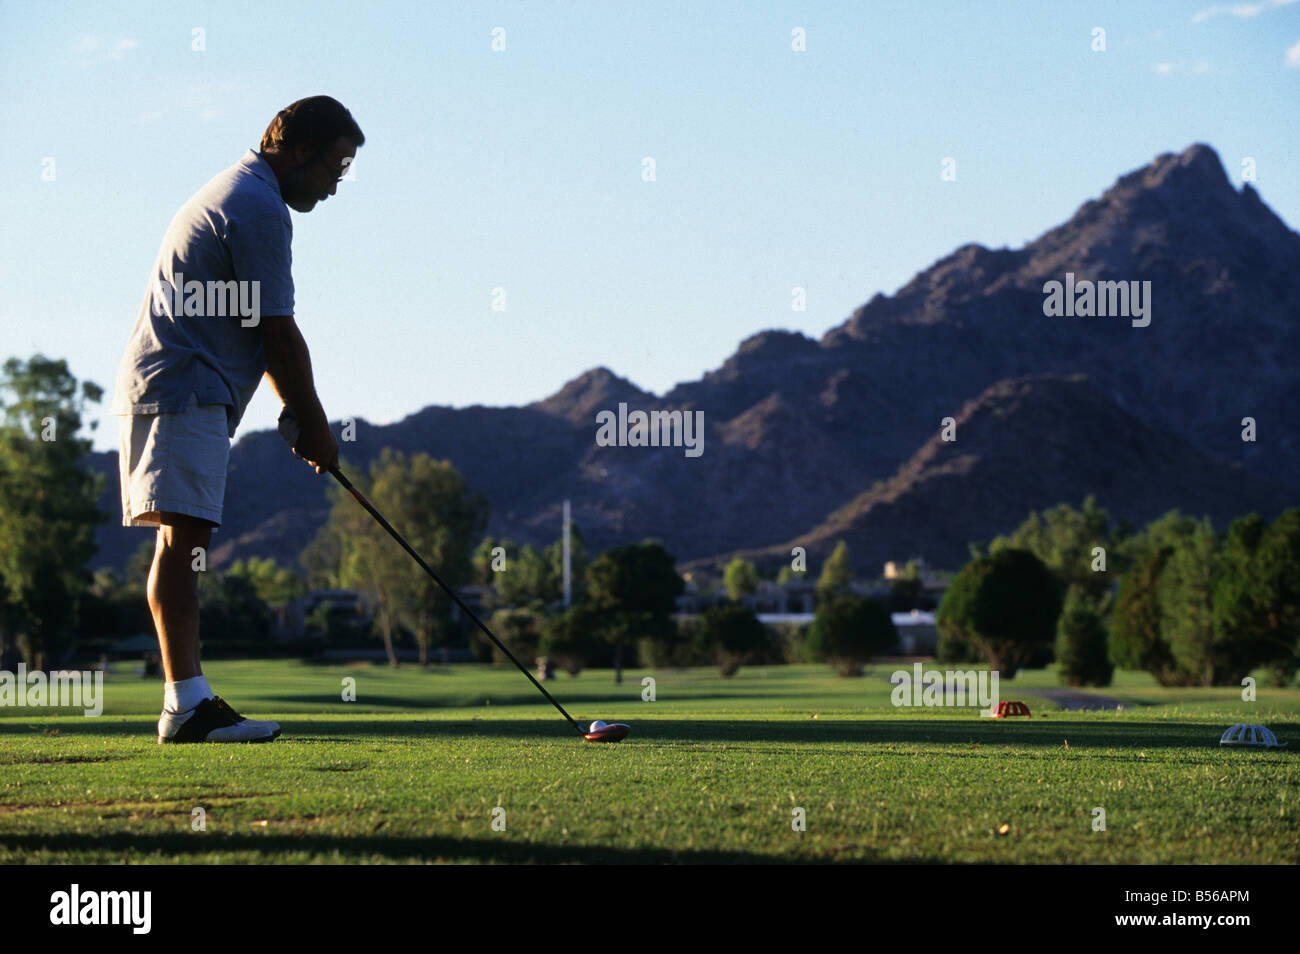 A golfer about to t-off at an irrigated golf course in the Arizona desert, Arizona, USA Stock Photo